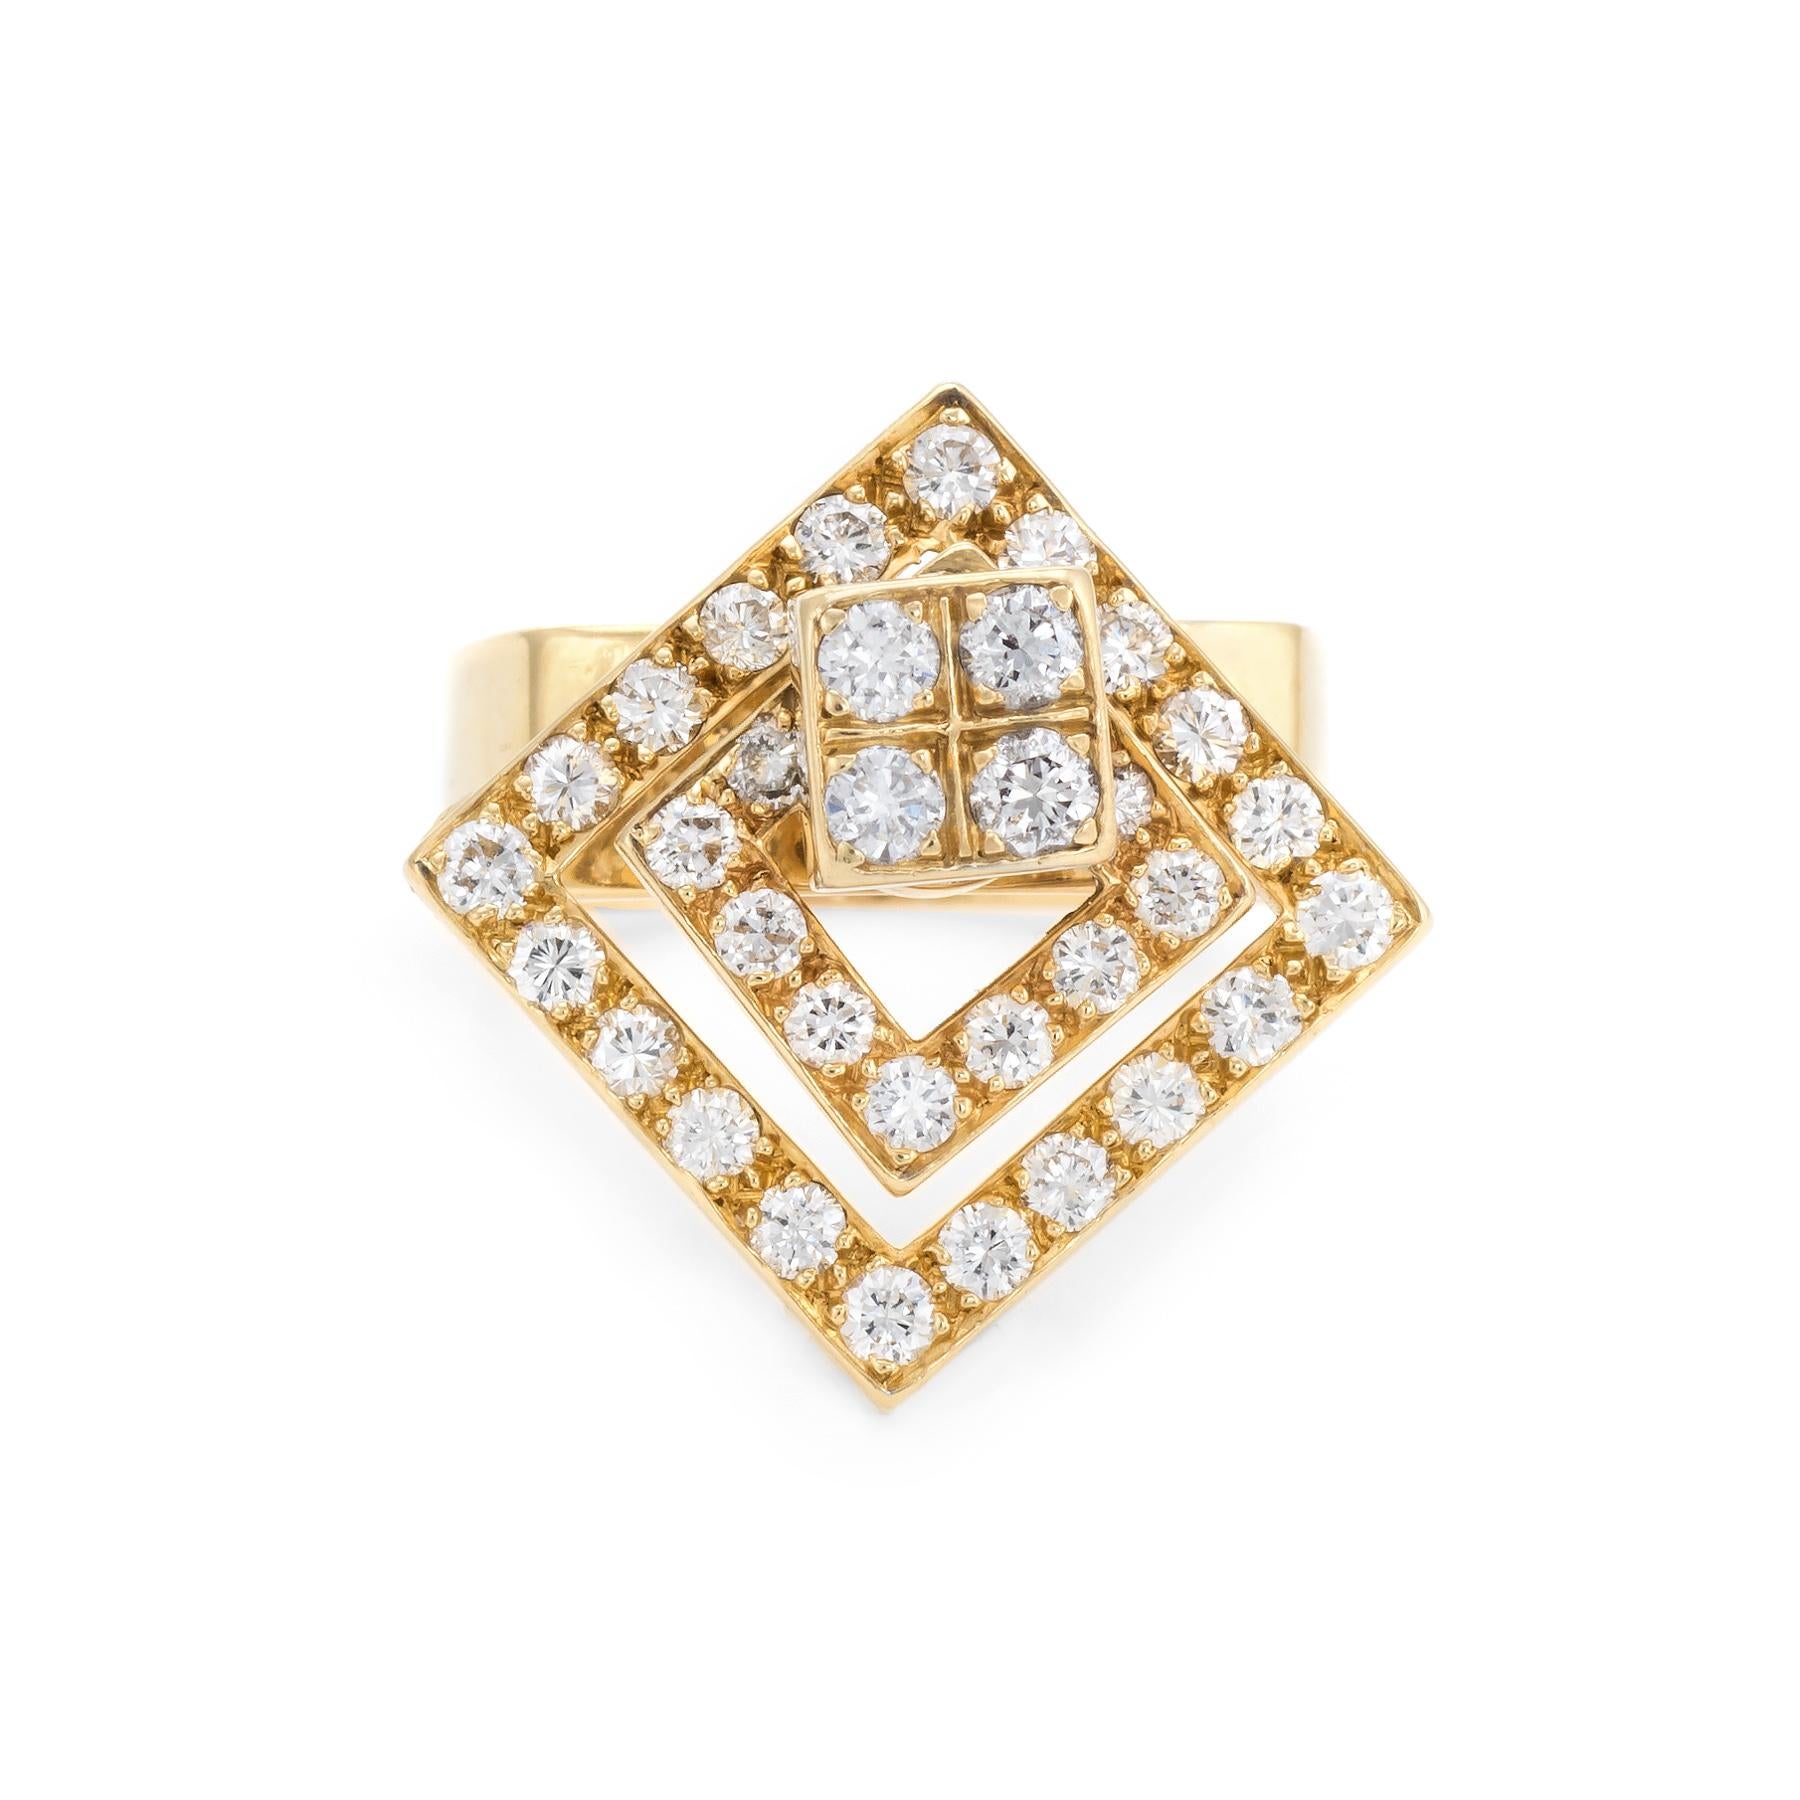 Finely detailed vintage cocktail ring (circa 1960s to 1970s), crafted in 14 karat yellow gold. 

Round brilliant cut diamonds graduate in size from 0.03 to 0.04 carats. The total diamond weight is estimated at 1.06 carats (estimated at H-I color and